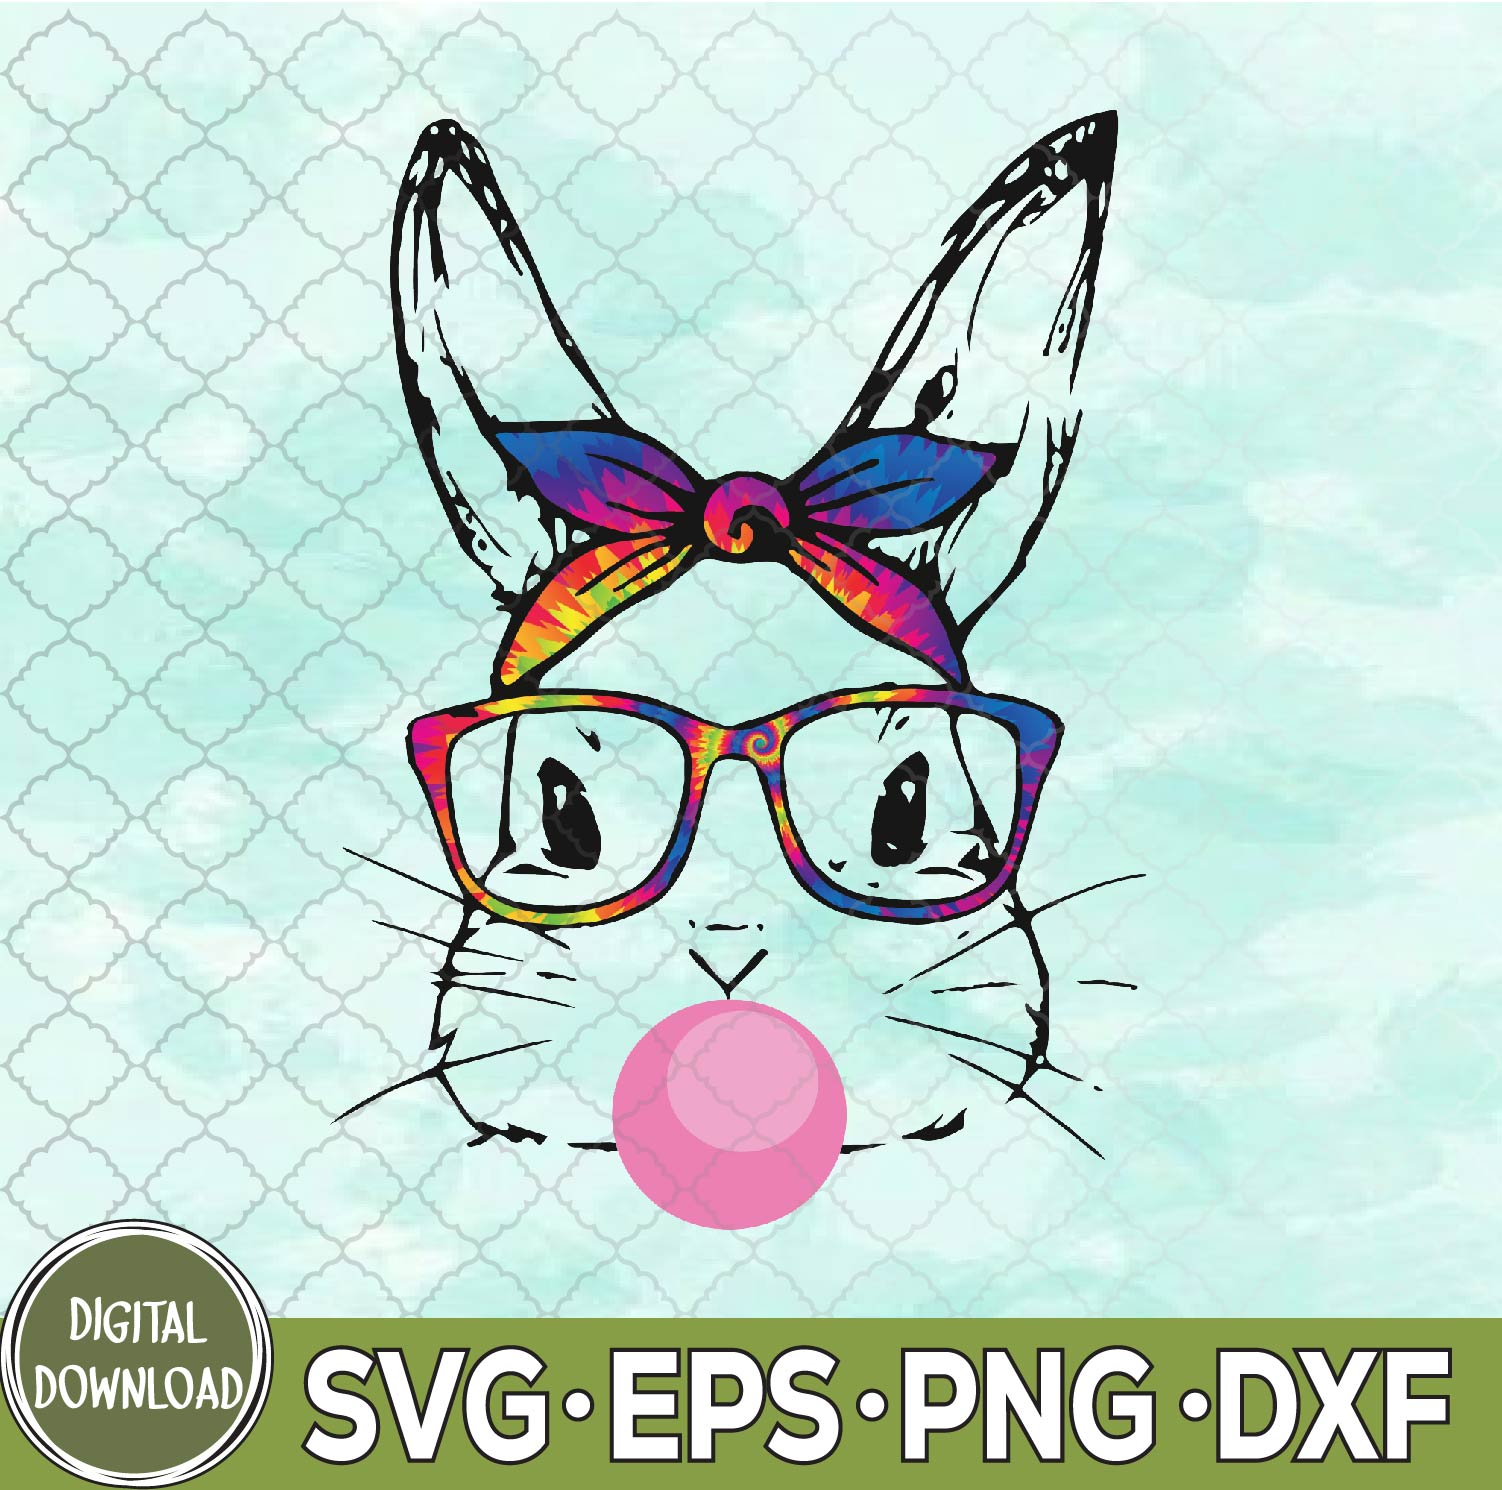 WTMNEW9file 09 114 Bubble Gum Bunny Svg, Easter Bunny With Bandana And Glasses Svg, Bunny With Bandana Svg, Eps, Png, Dxf